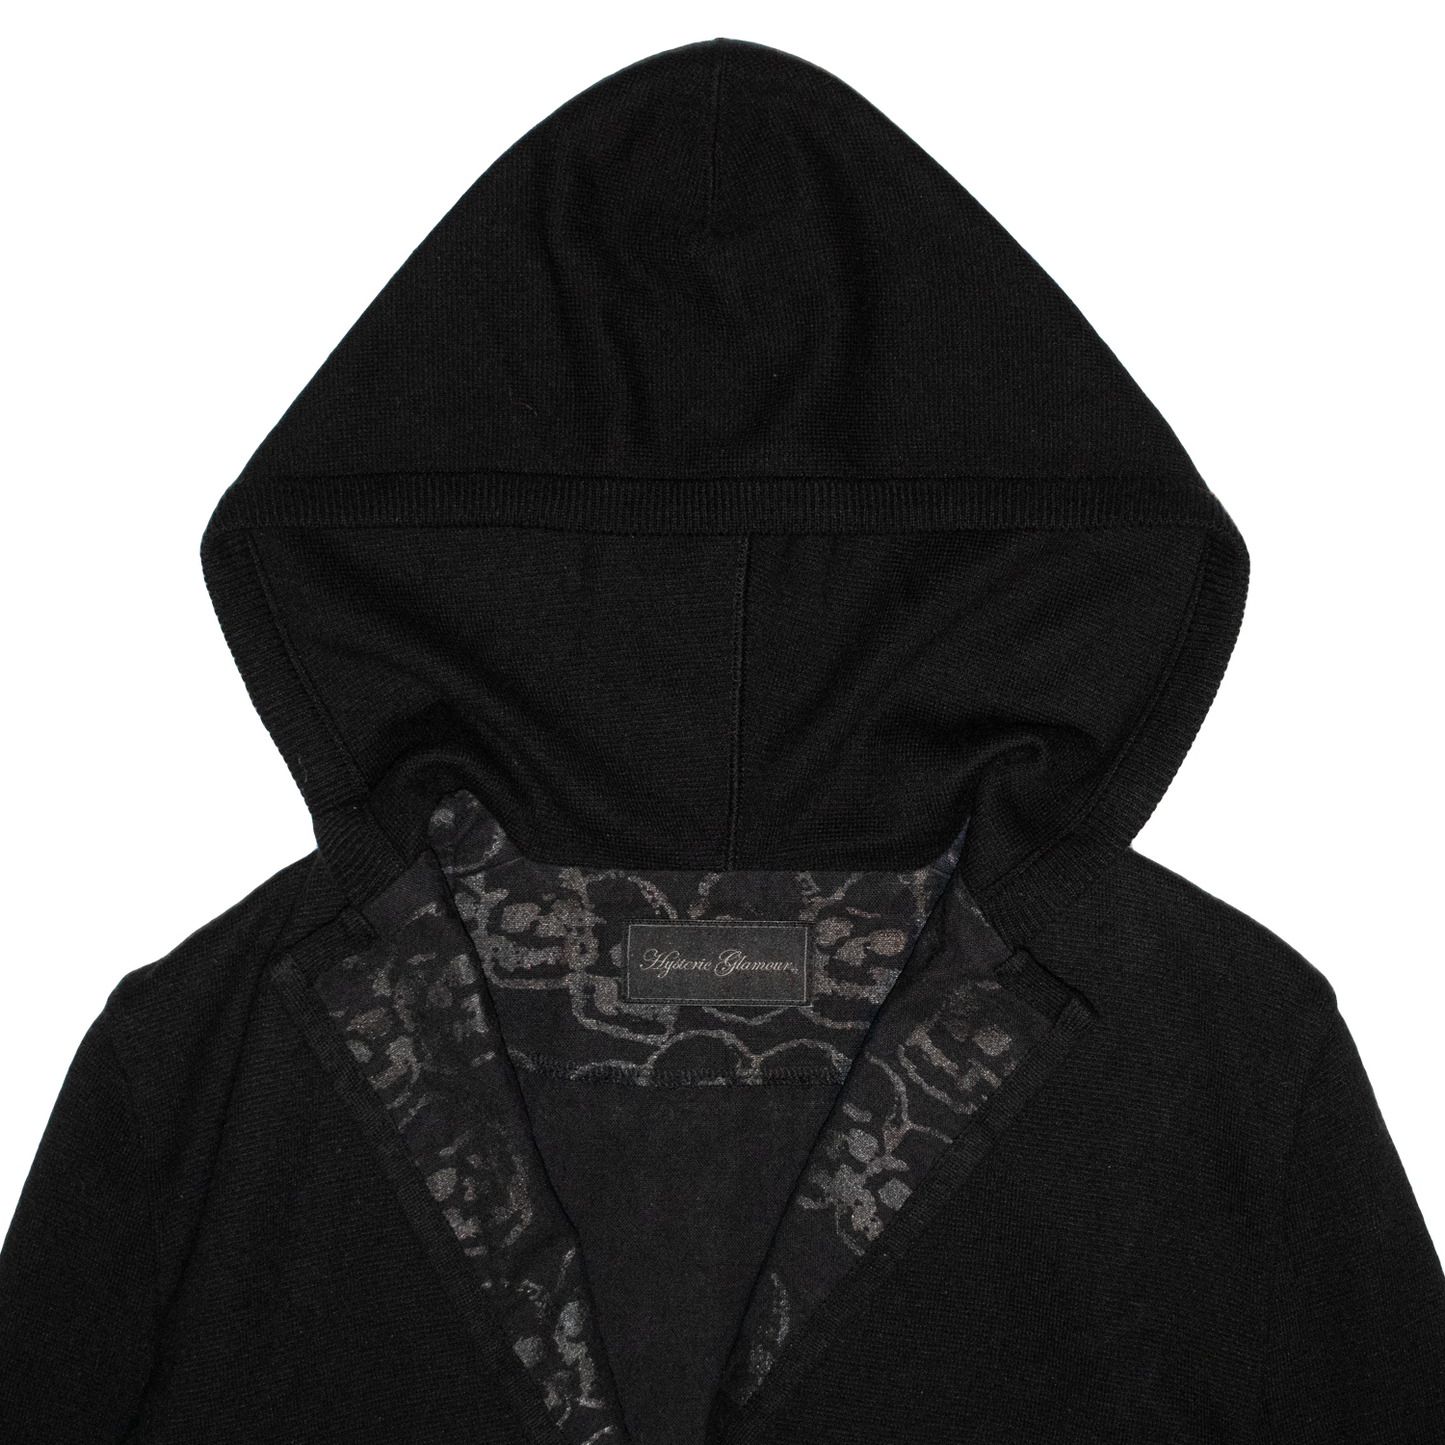 Hysteric Glamour Skulls Hooded Knit Cardigan - 1990’s